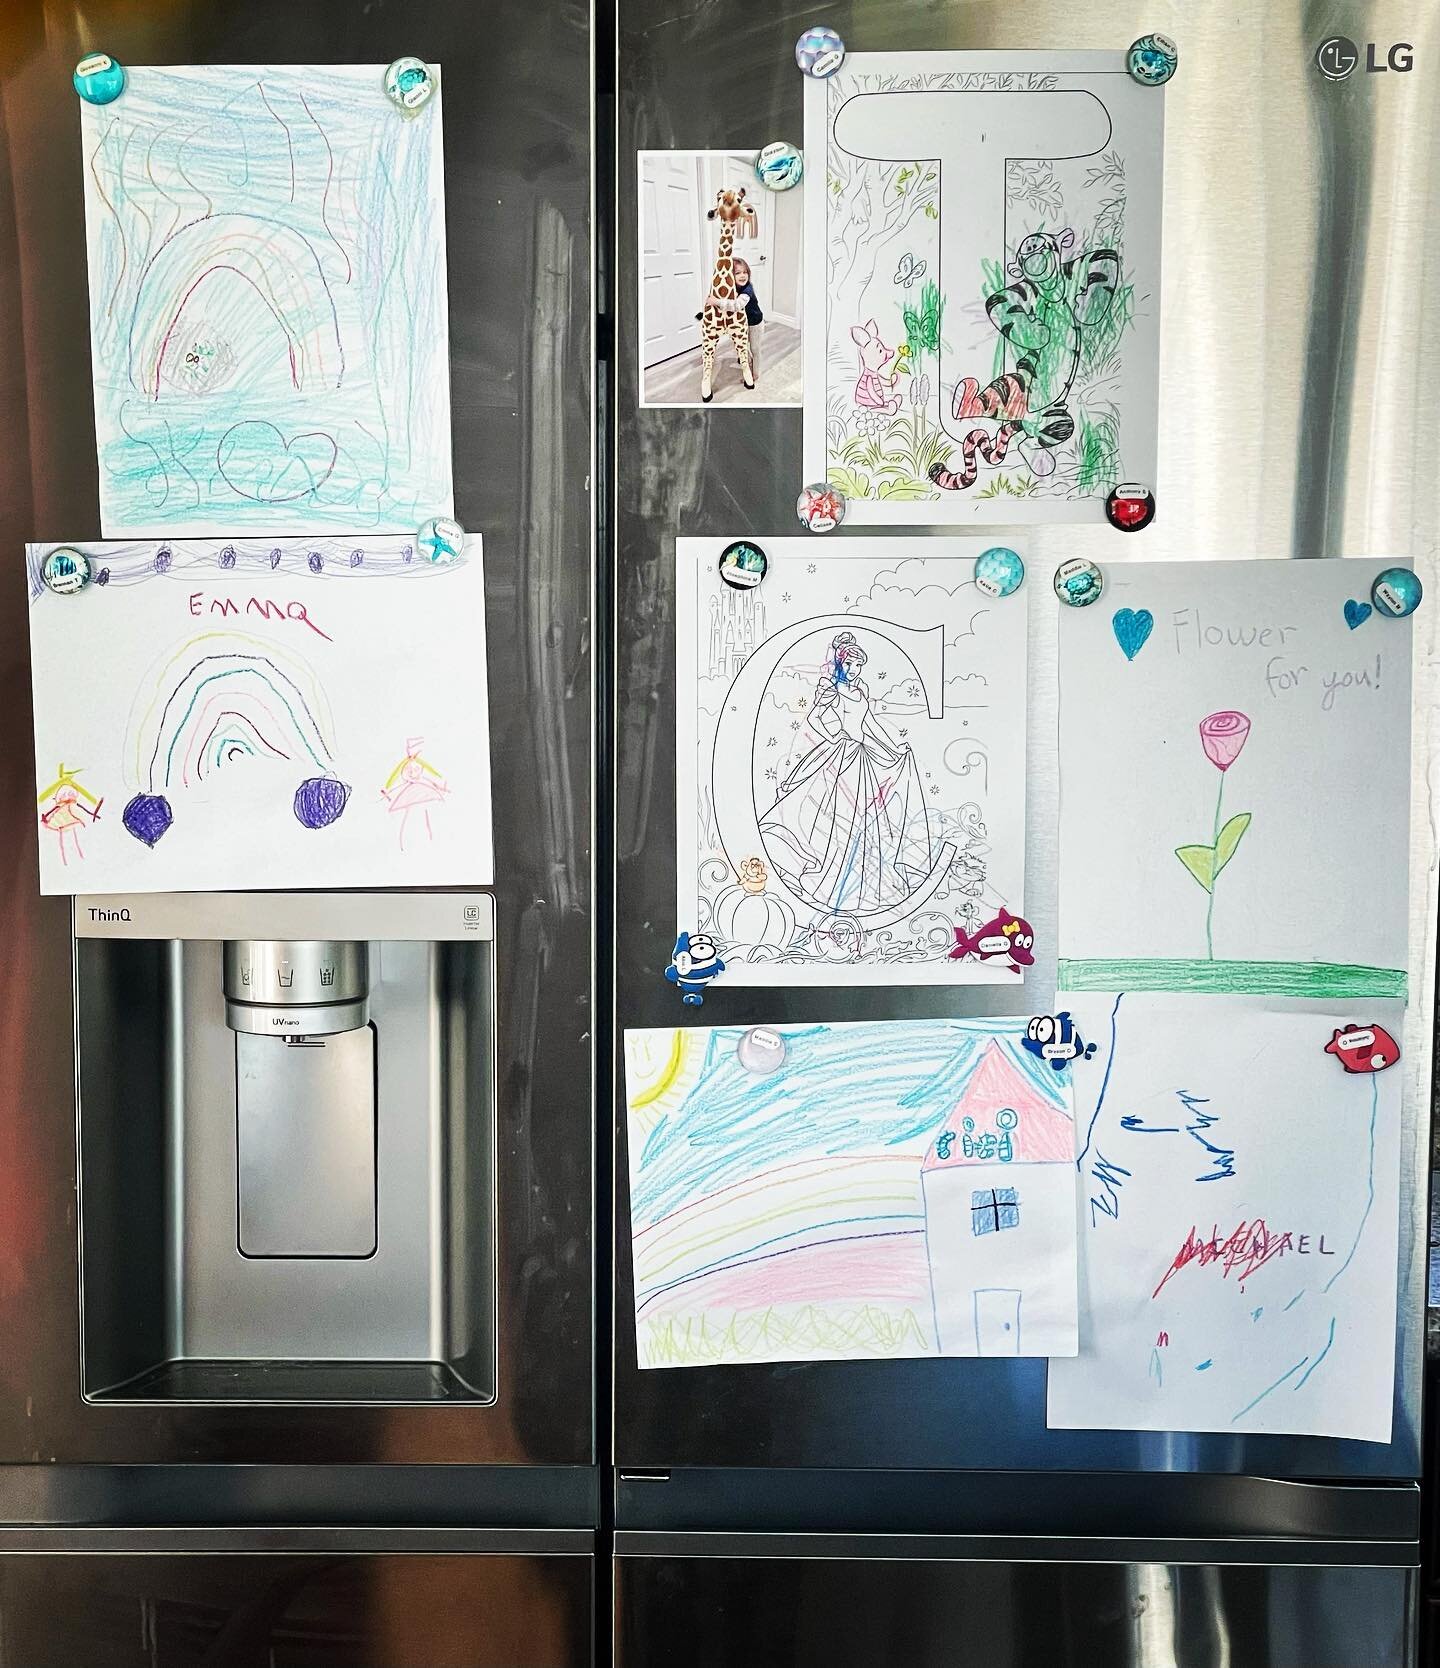 You can&rsquo;t look at this fridge and not feel the love. I have the best job. I LOVE and appreciate all my students&rsquo; art that they were so thoughtful to make for me. 🥰 #kidsarethebest #ifeelthelove #swimminglessonsrule #nevergoingbacktoworkf